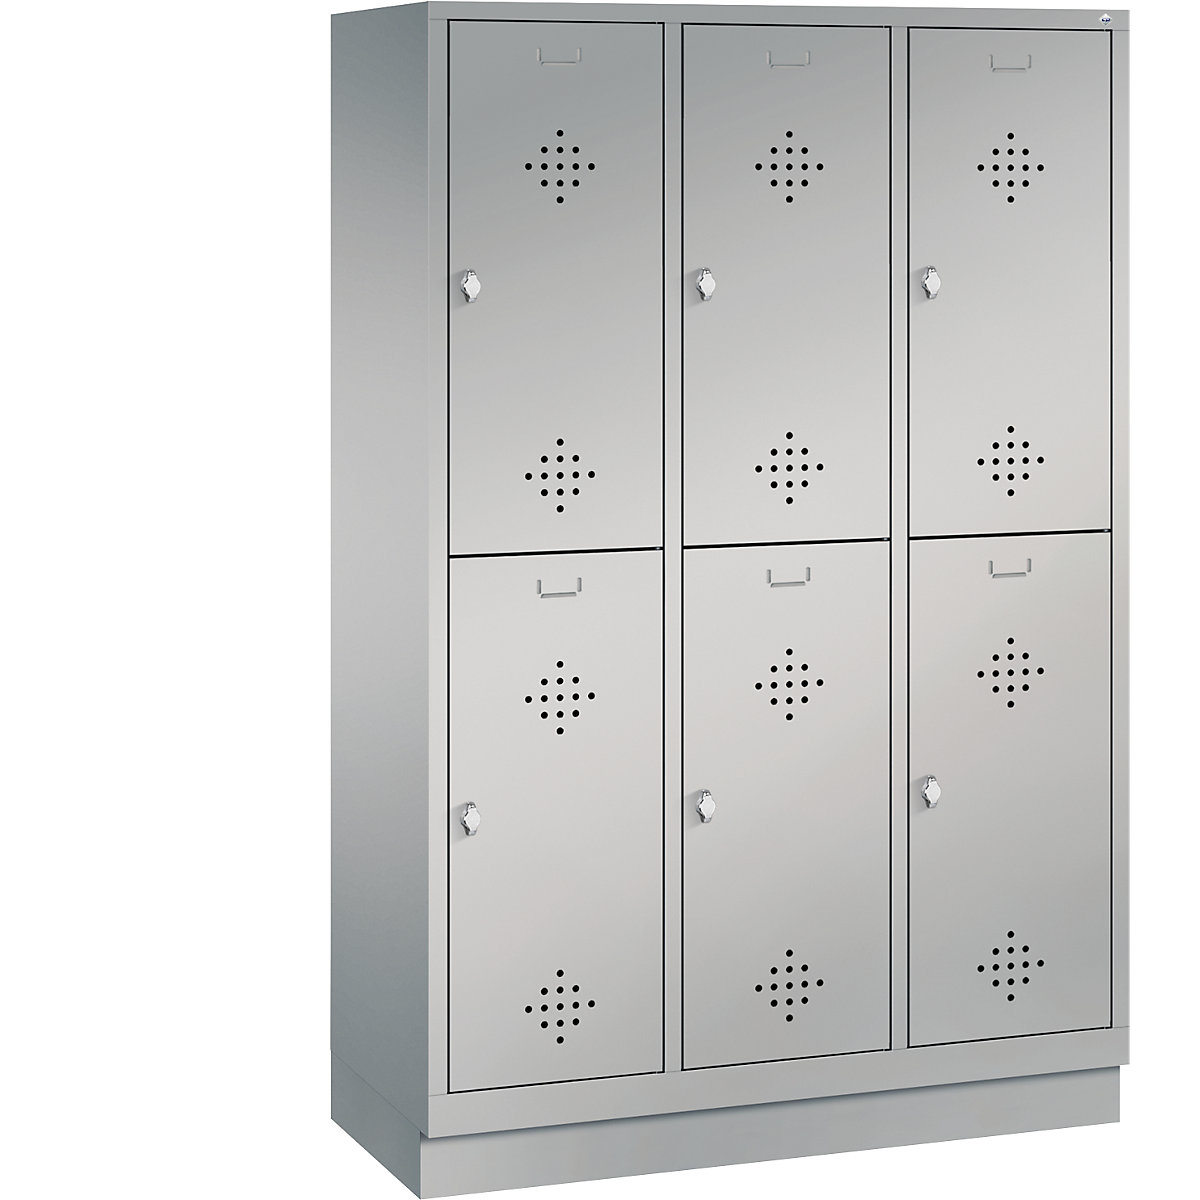 CLASSIC cloakroom locker with plinth, double tier – C+P, 3 compartments, 2 shelf compartments each, compartment width 400 mm, white aluminium-5